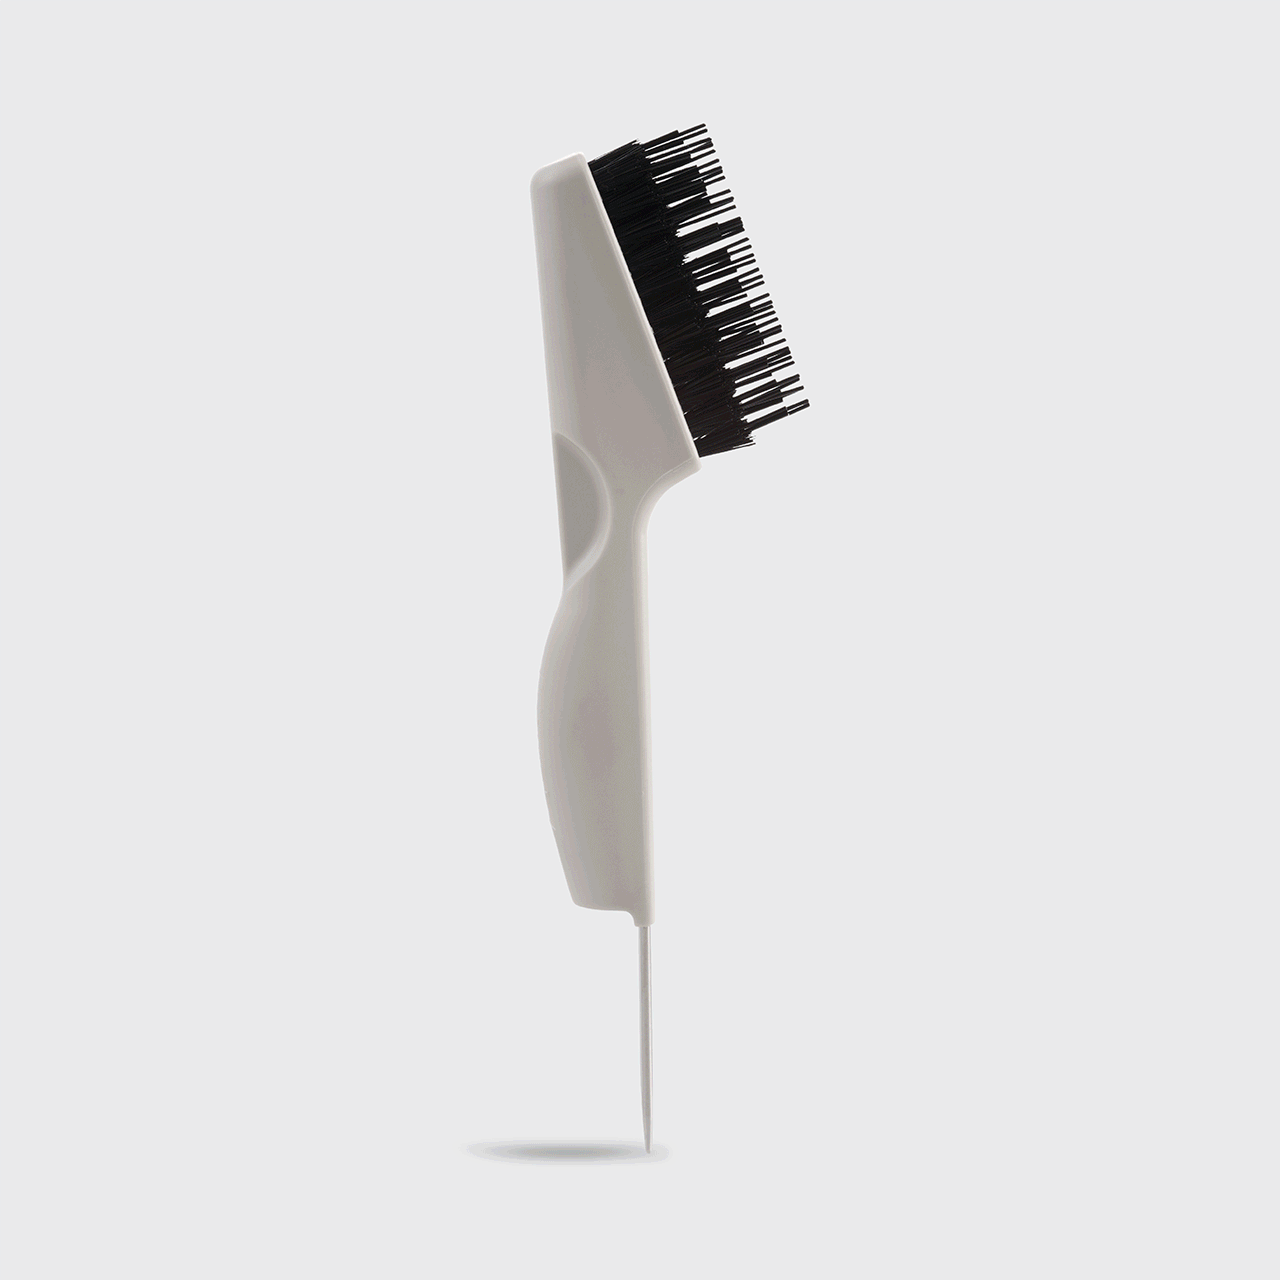 Hair Brush Cleaner Tool,Comb Cleaning hairbrush, for Removing Hair and  Debris, Black